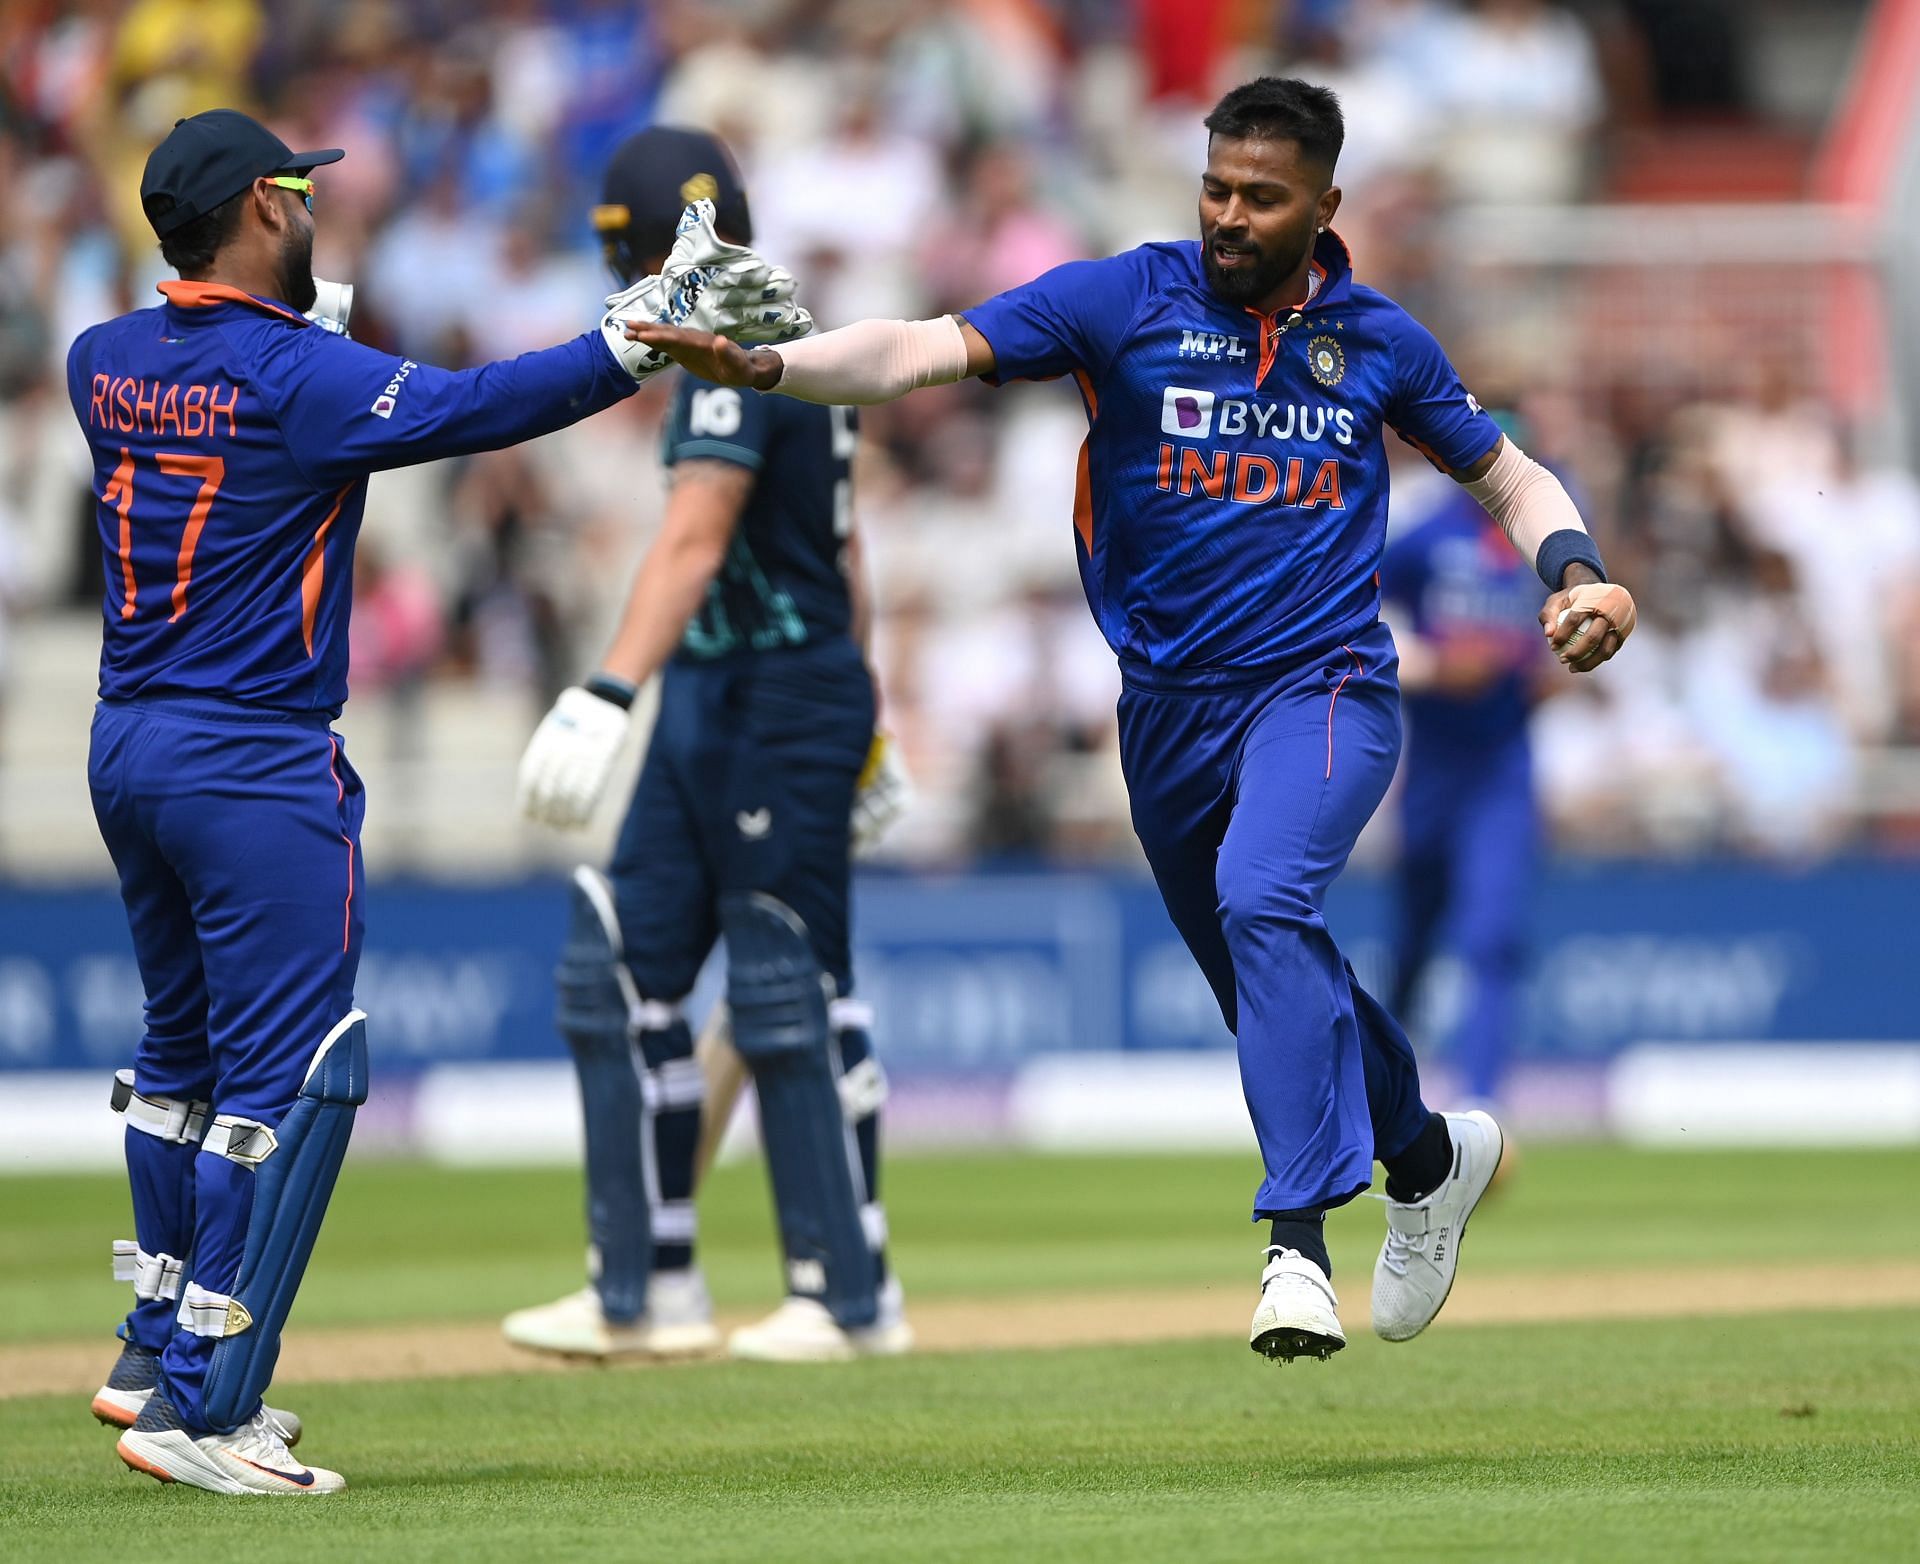 Hardik Pandya celebrates one of his four wickets. Pic: Getty Images